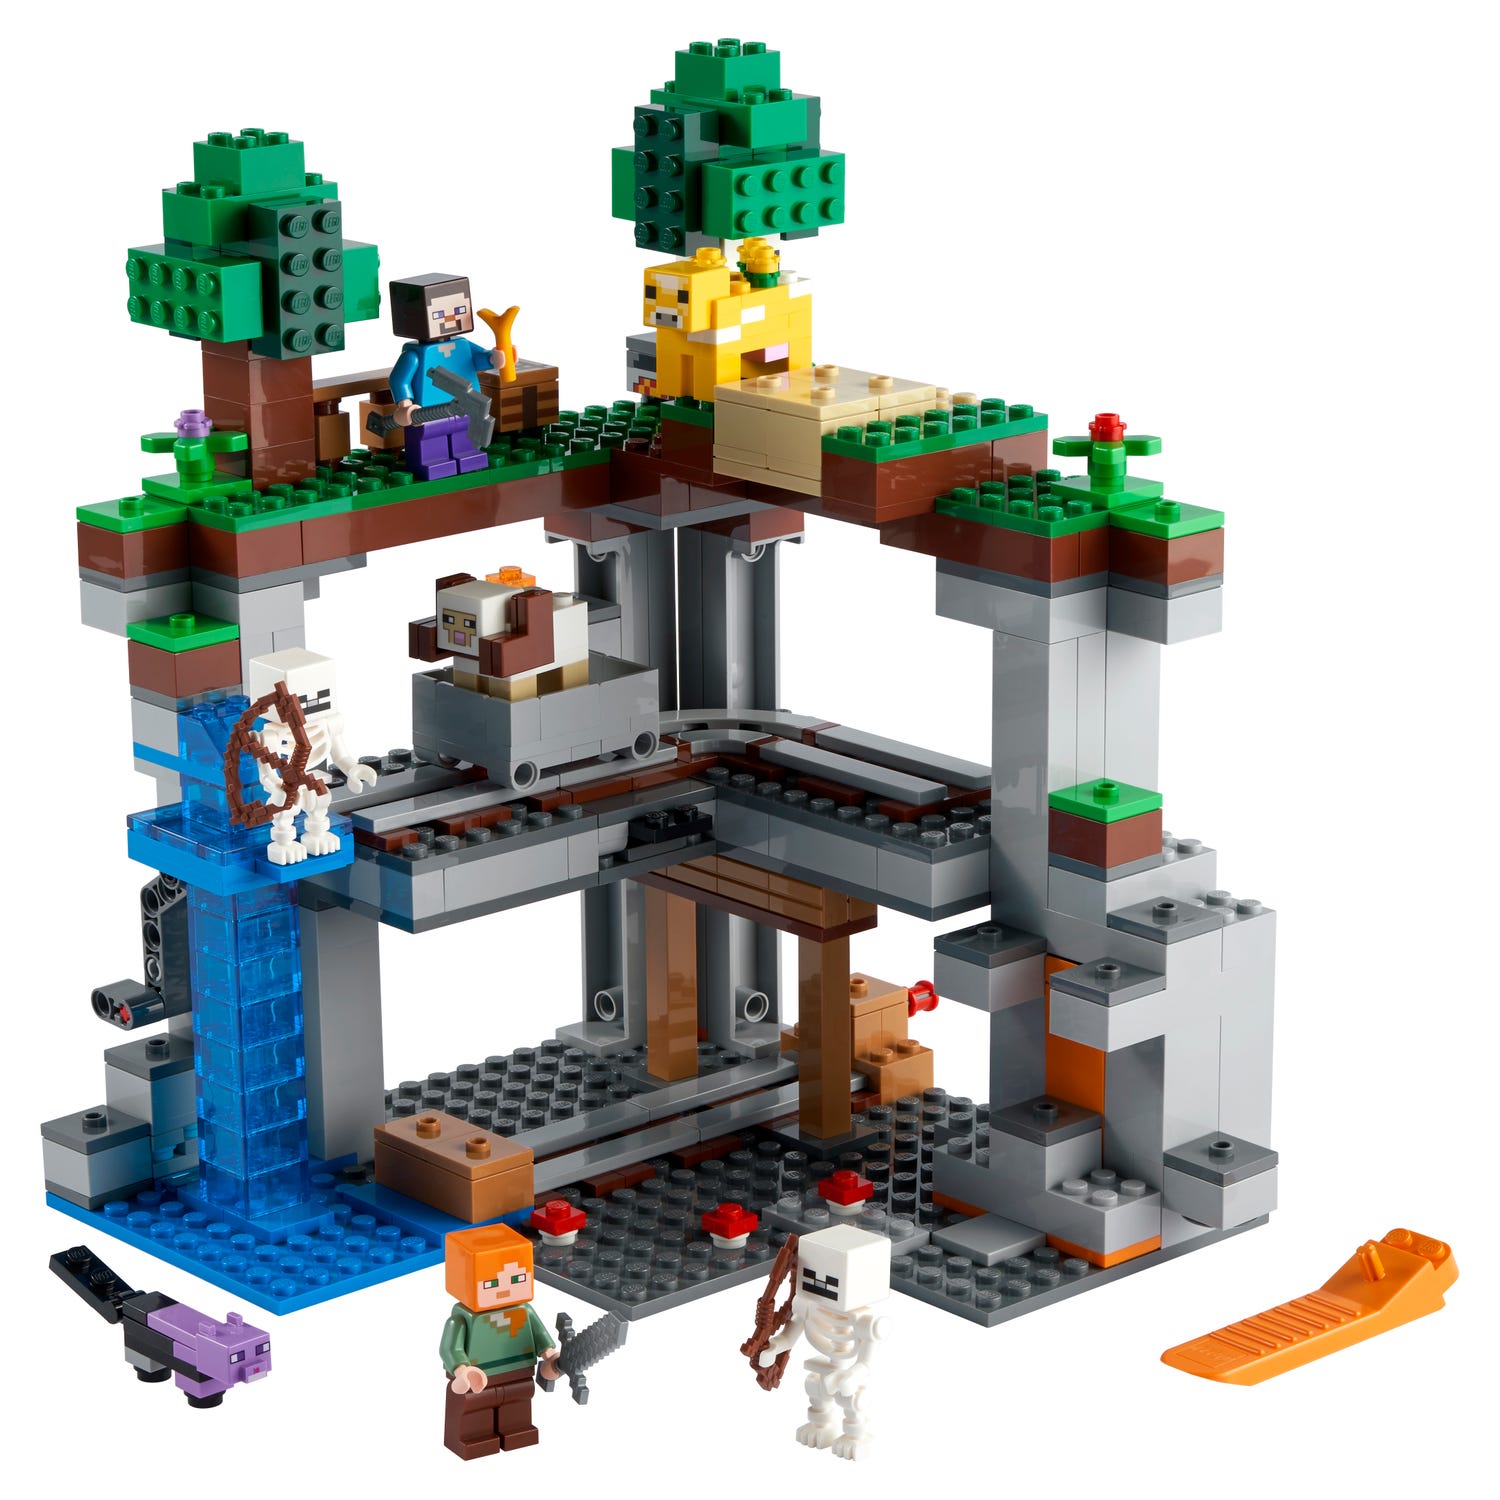 The First Adventure 21169 | MinecraftÂ® | Buy online at the Official LEGOÂ® Shop GB